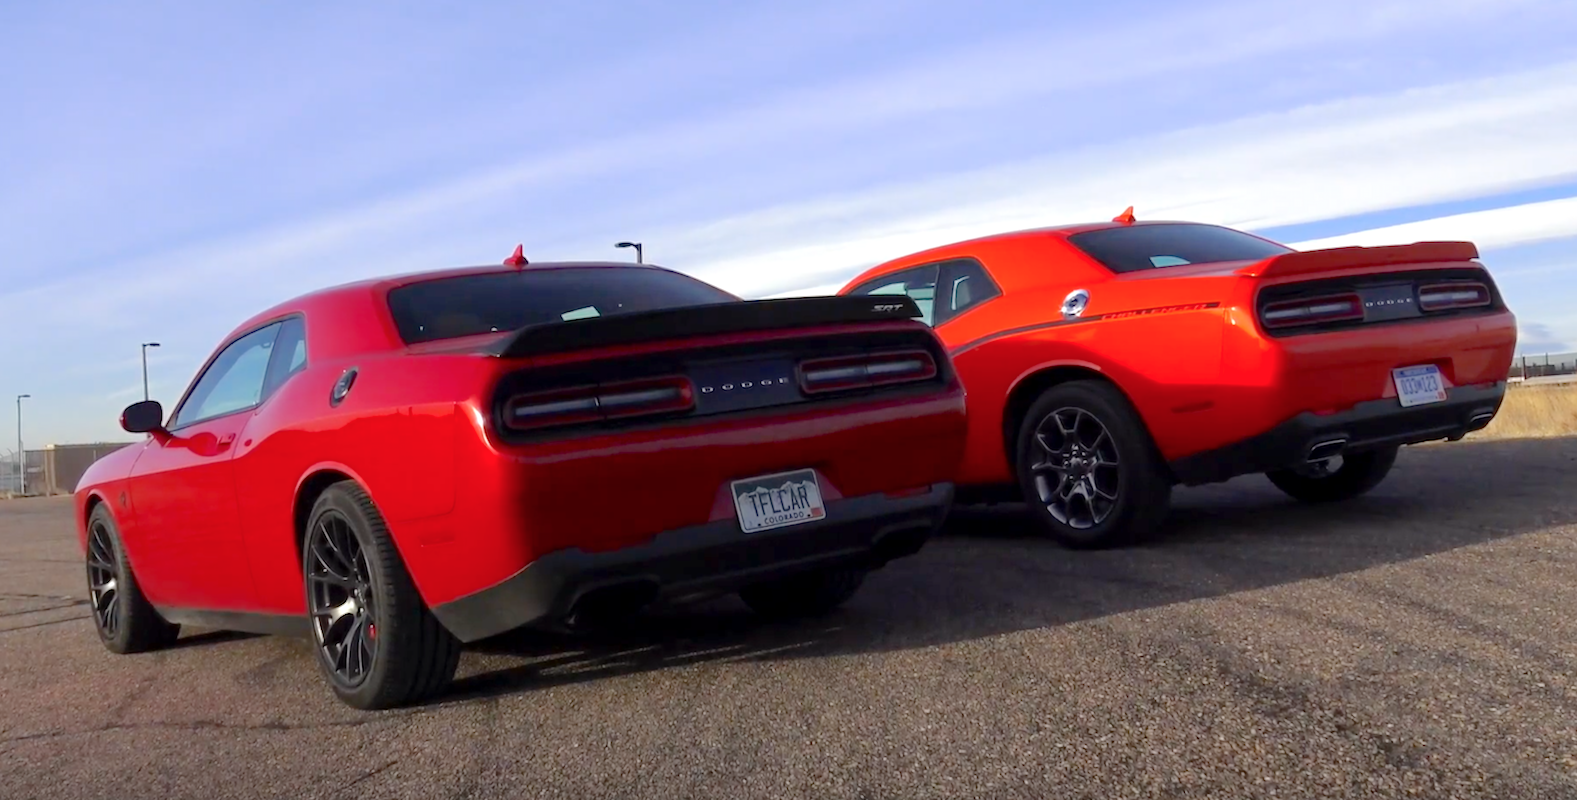 Hp Vs Awd 2017 Dodge Challenger Gt Takes On The Hellcat In Drag Race The Fast Lane Car